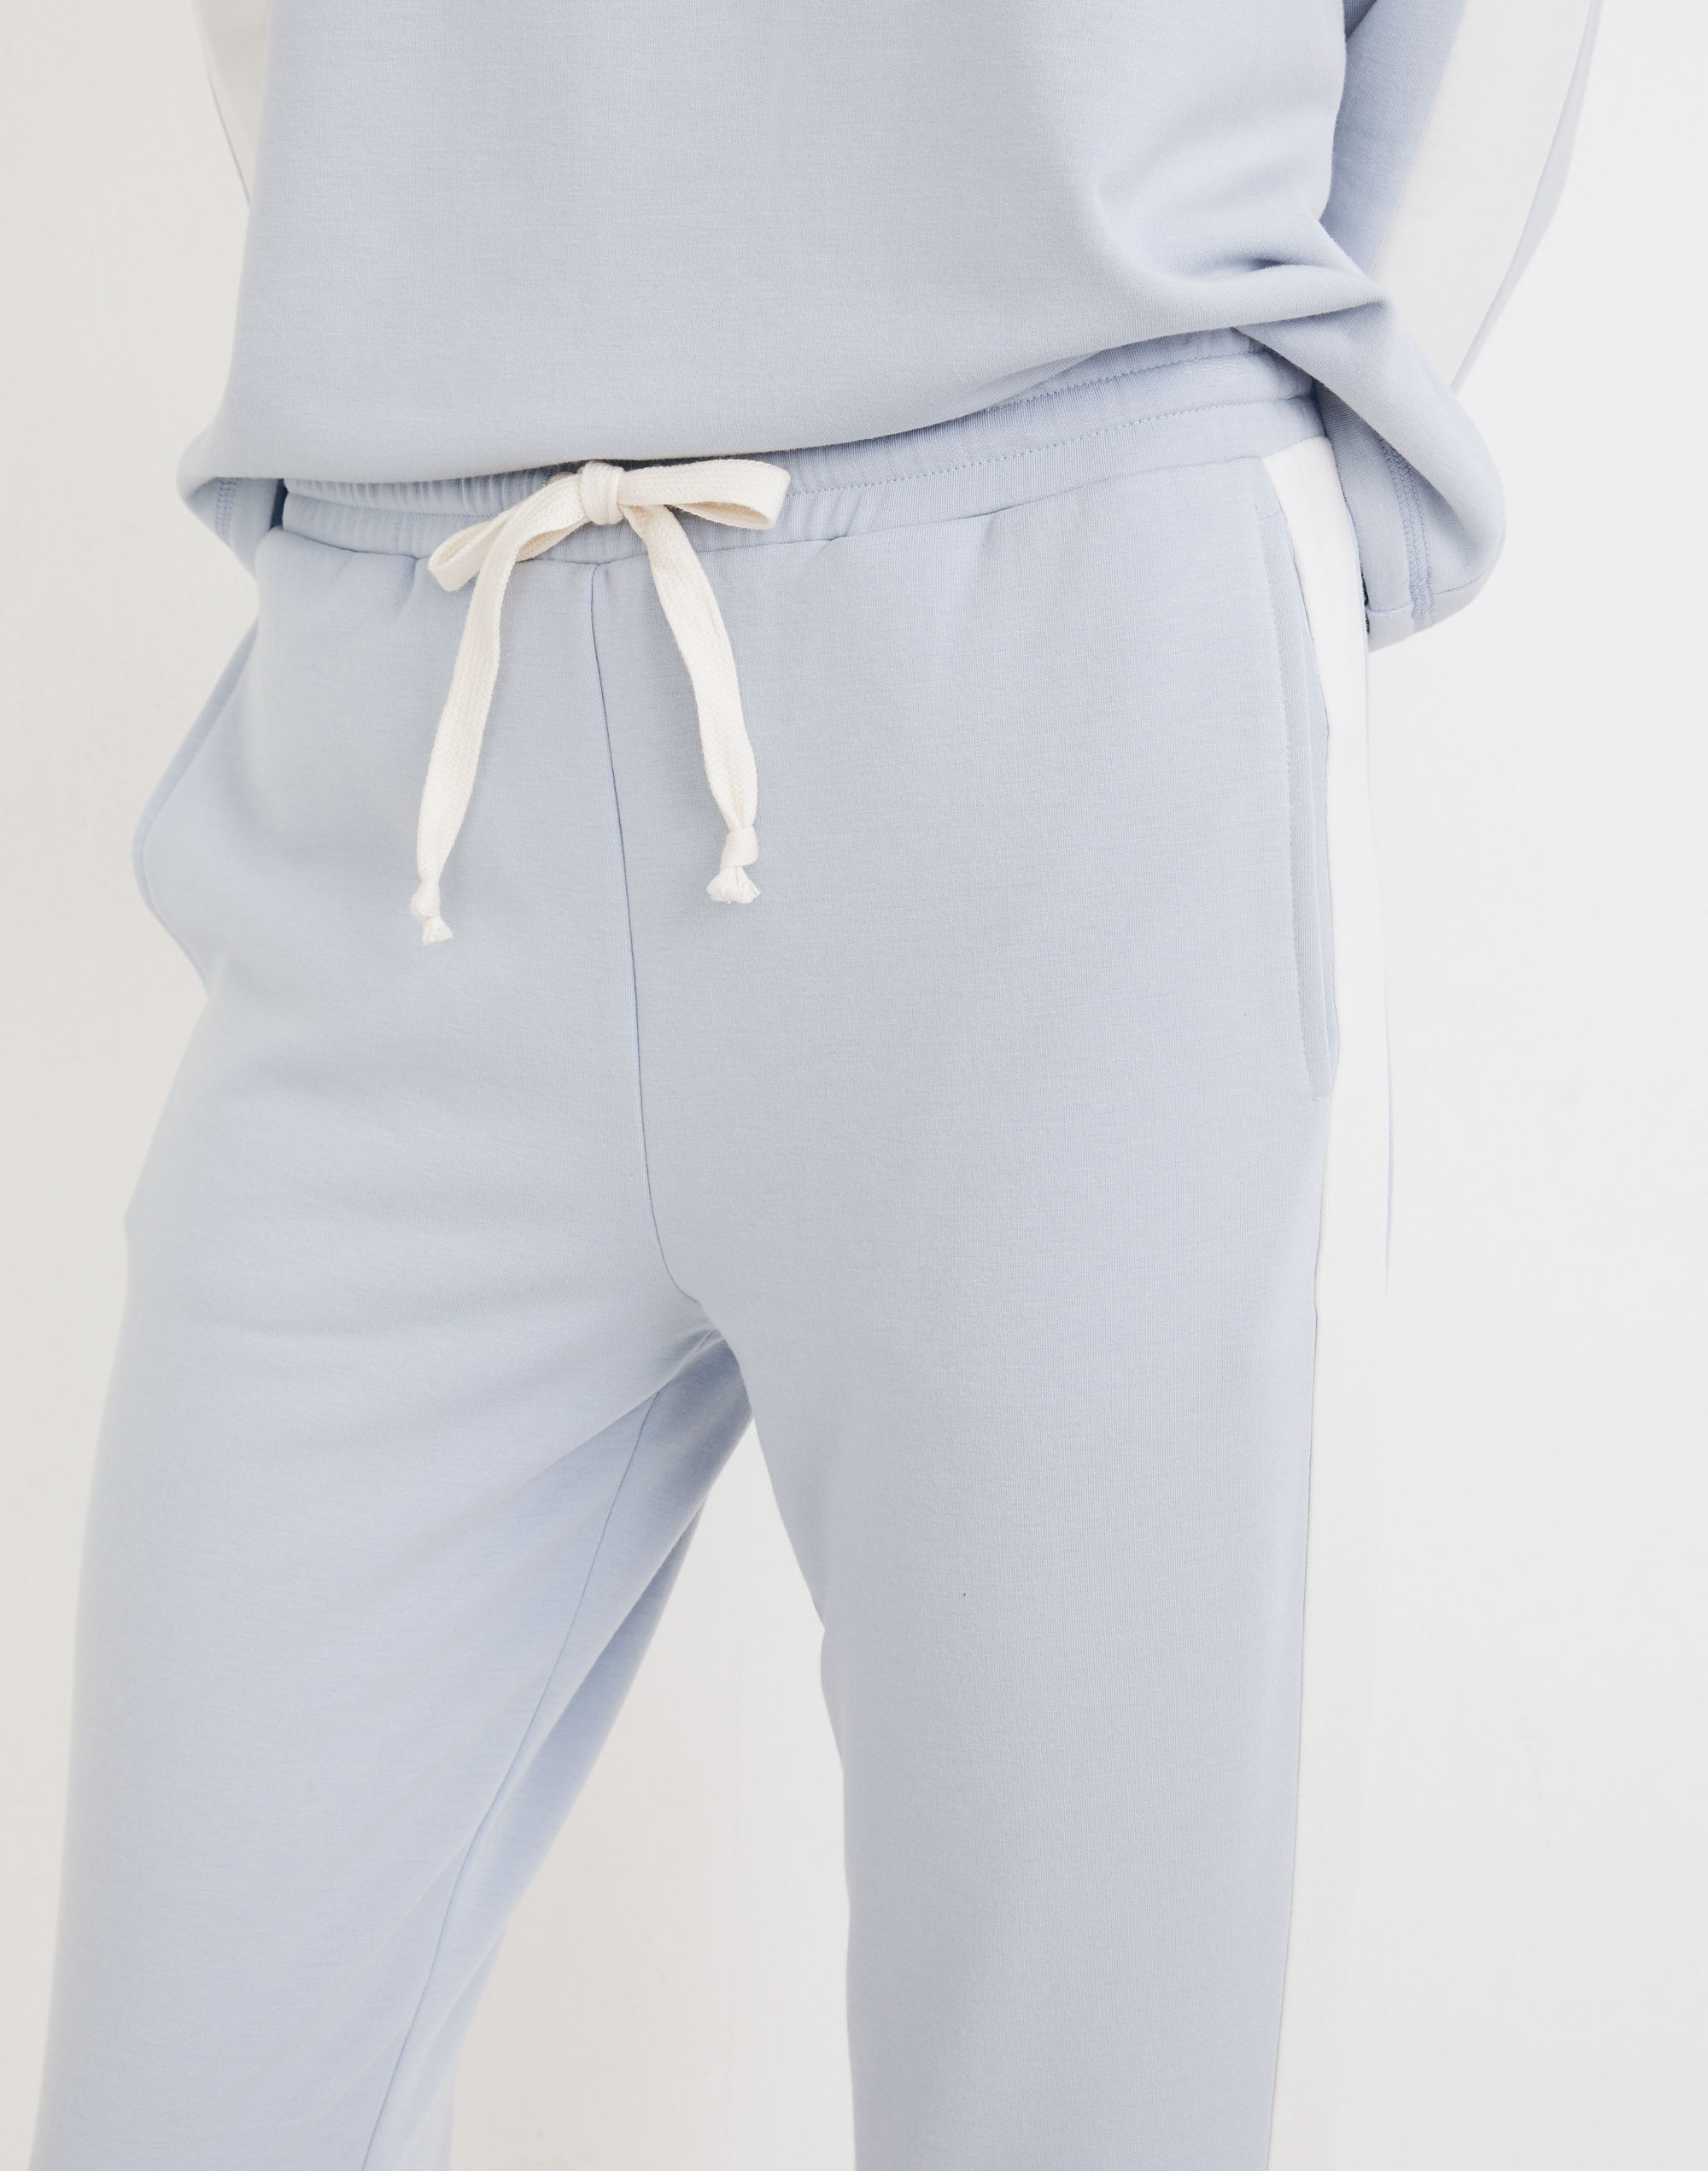 MWL Superbrushed Inset Easygoing Sweatpants